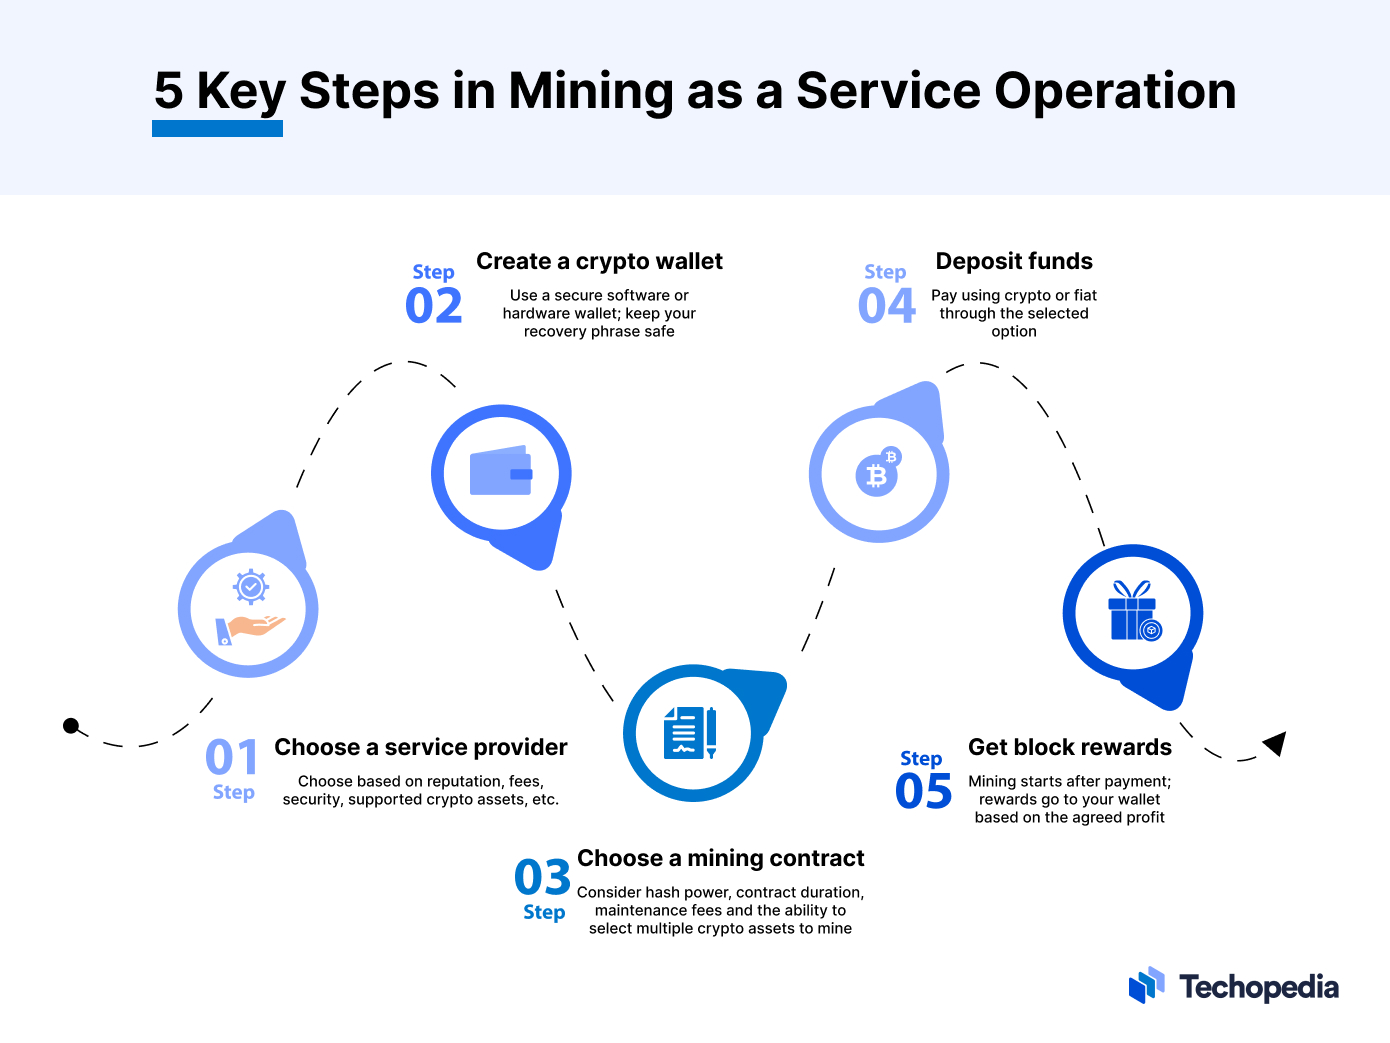 5 Key Steps in Mining as a Service Operation